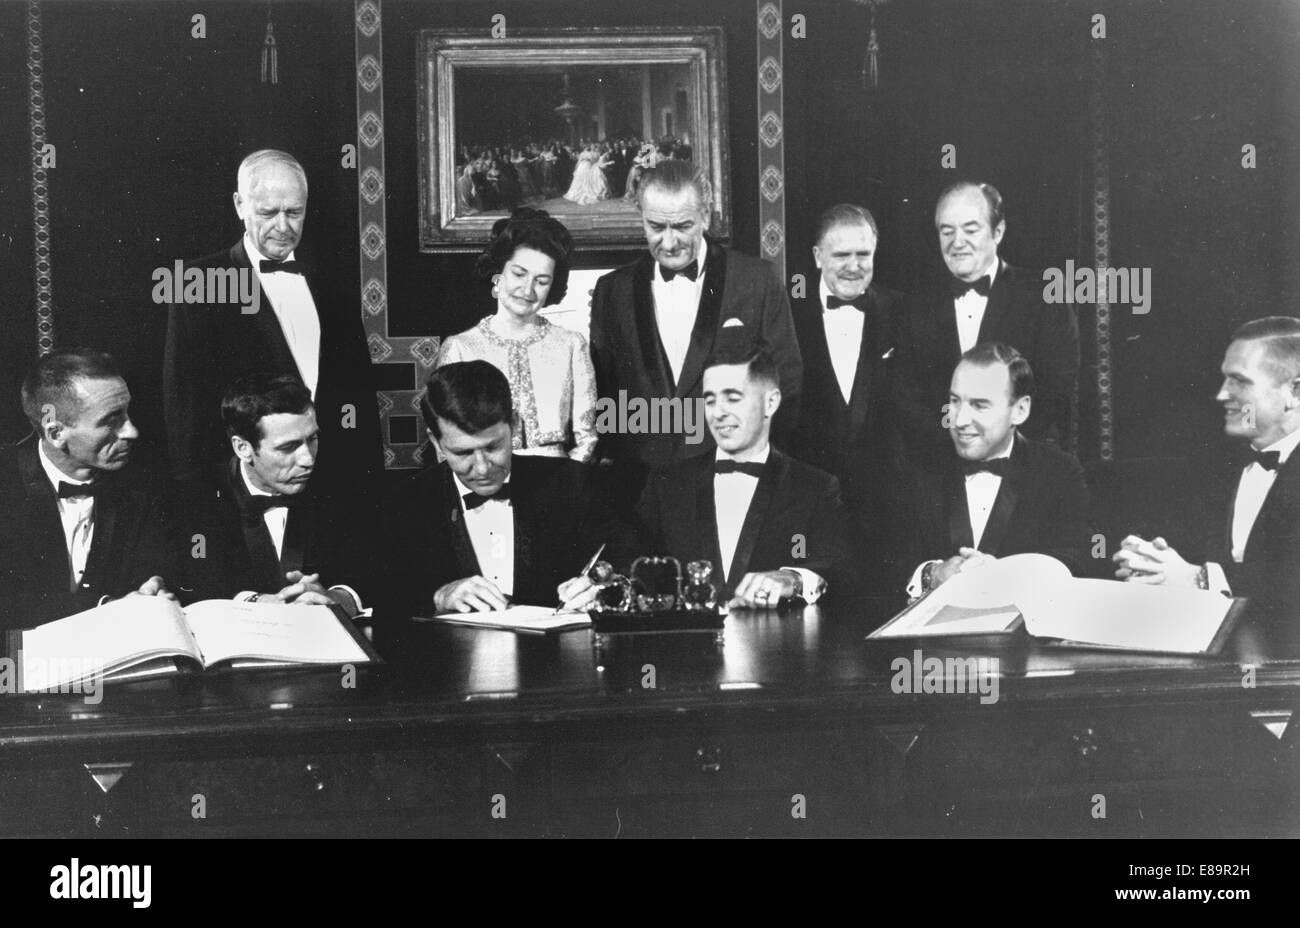 Apollo 7 and 8 flight crews sign a commemorative document to be hung in the Treaty Room of the White House honoring the occasion. Those signing are from left to right: Apollo 7 Astronauts: Walter Cunningham, Donn F. Eisele, and Walter M. Schirra. Apollo 8 Astronauts: William A. Anders, James A. Lovell, Jr., and Frank Borman. Standing are: Charles A. Lindbergh (also a signer) Lady Bird Johnson President Lyndon B. Johnson NASA Administrator James E. Webb, Vice President Hubert H. Humphrey.   Image # : 68-H-1300  Date: December 3, 1968 Stock Photo